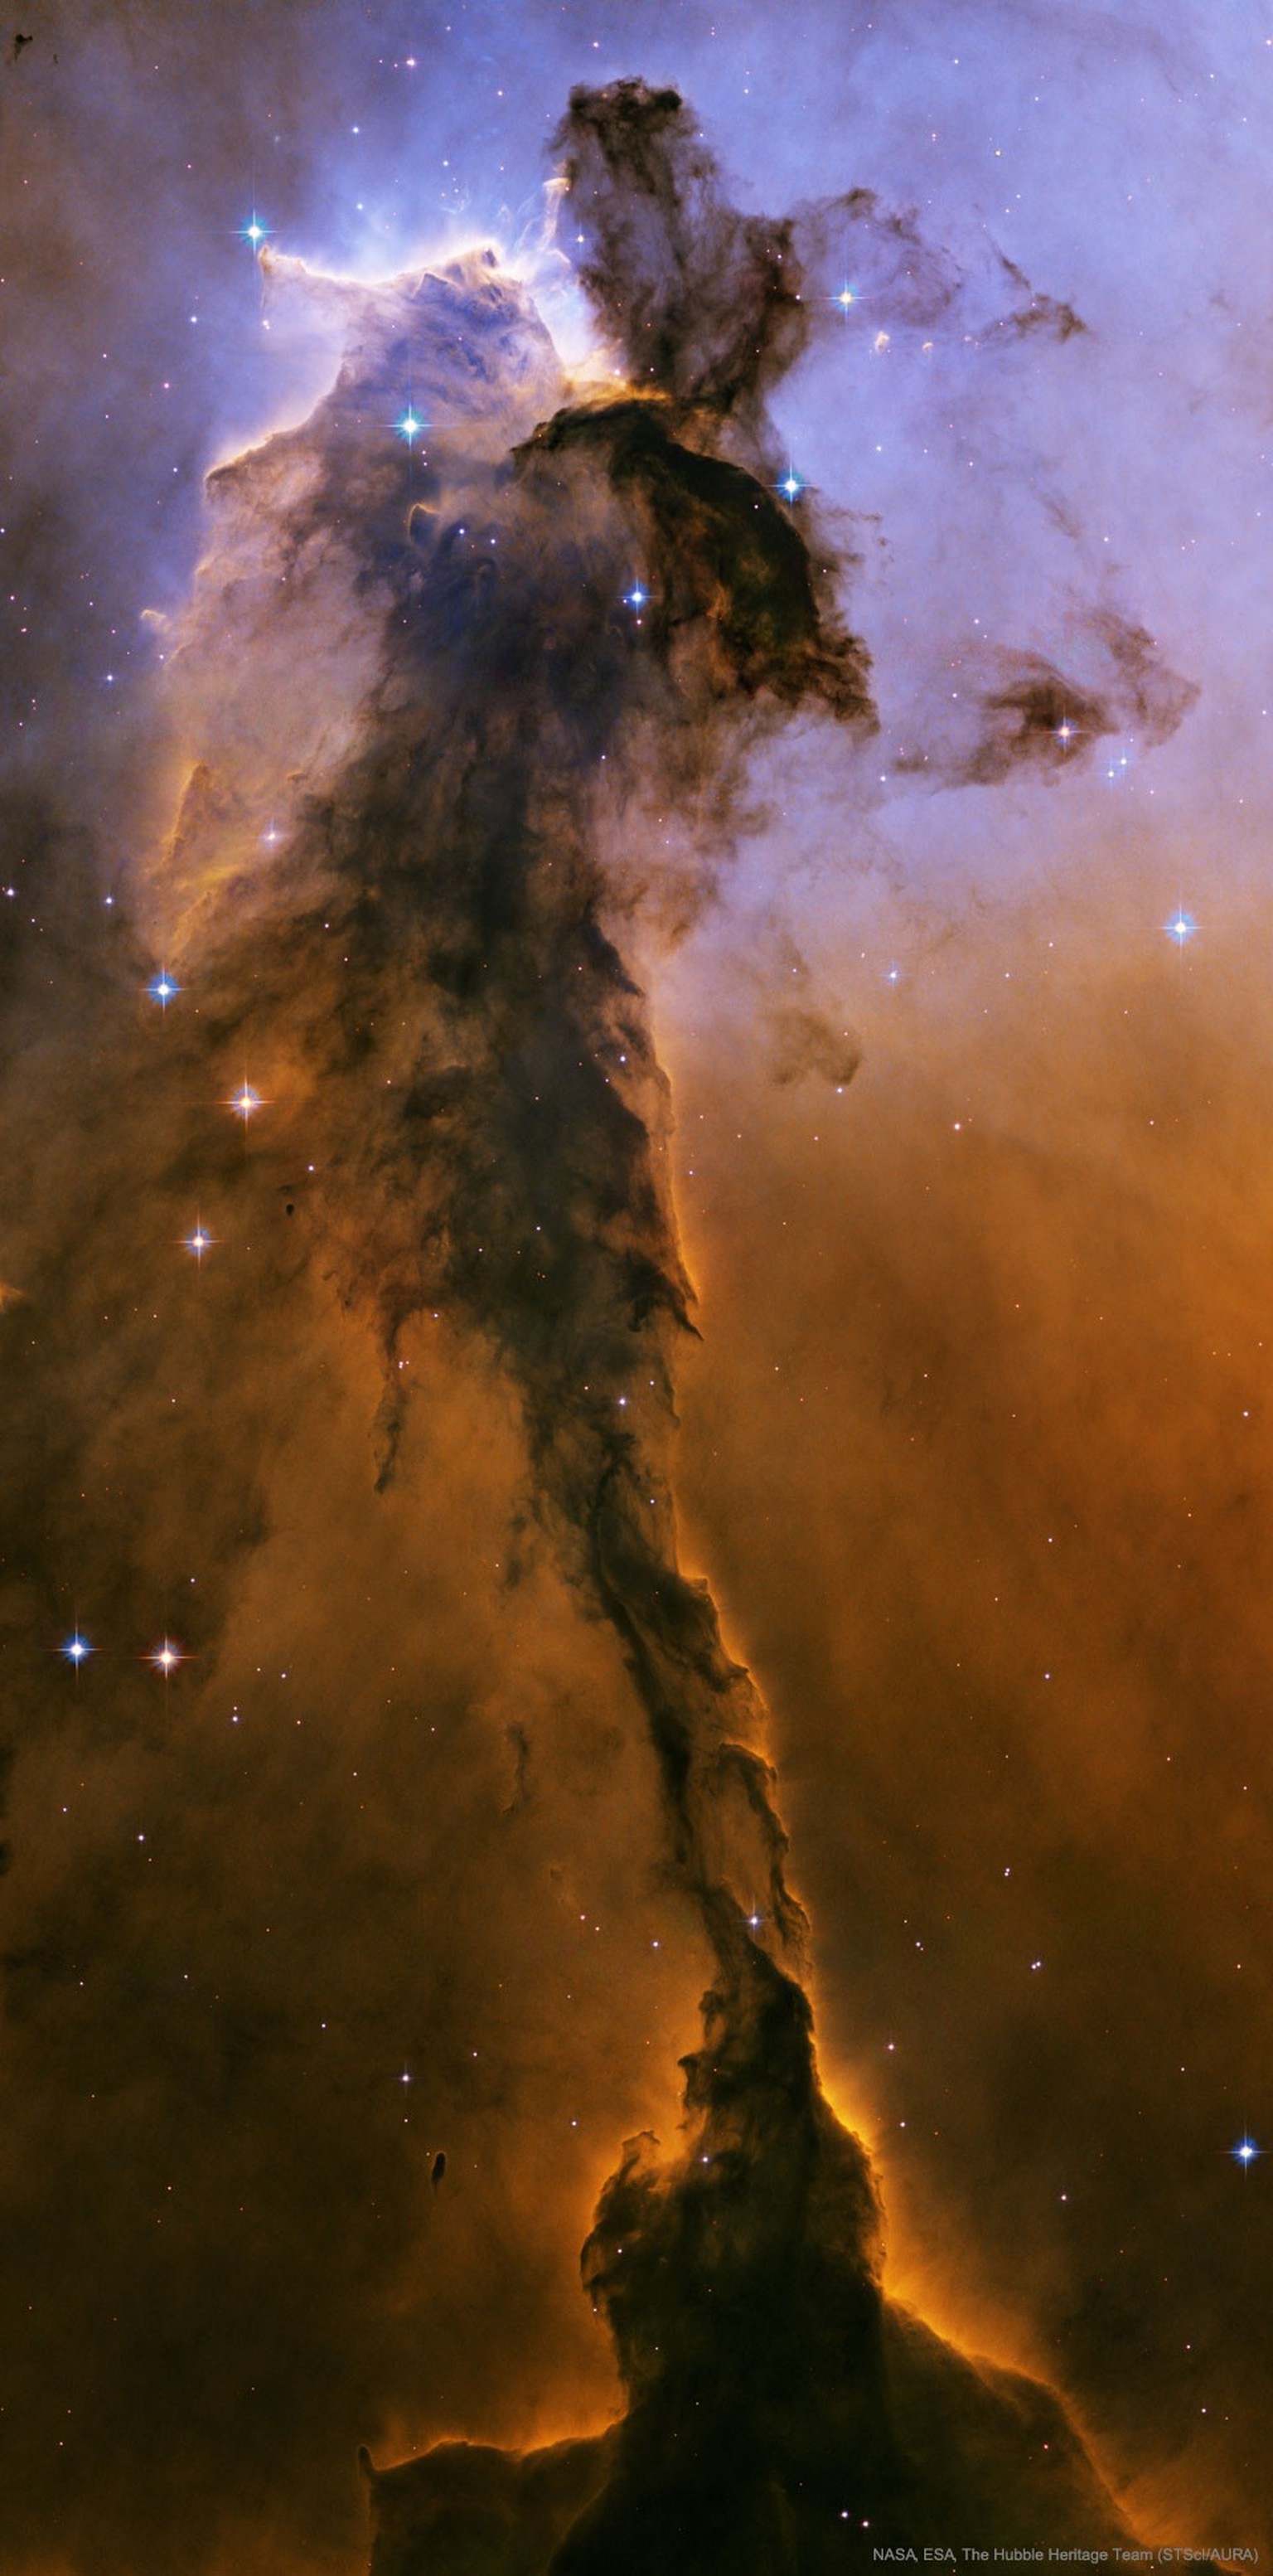 The Fairy of Eagle Nebula 
The dust sculptures of the Eagle Nebula are evaporating. As powerful starlight whittles away these cool cosmic mountains, the statuesque pillars that remain might be imagine ...